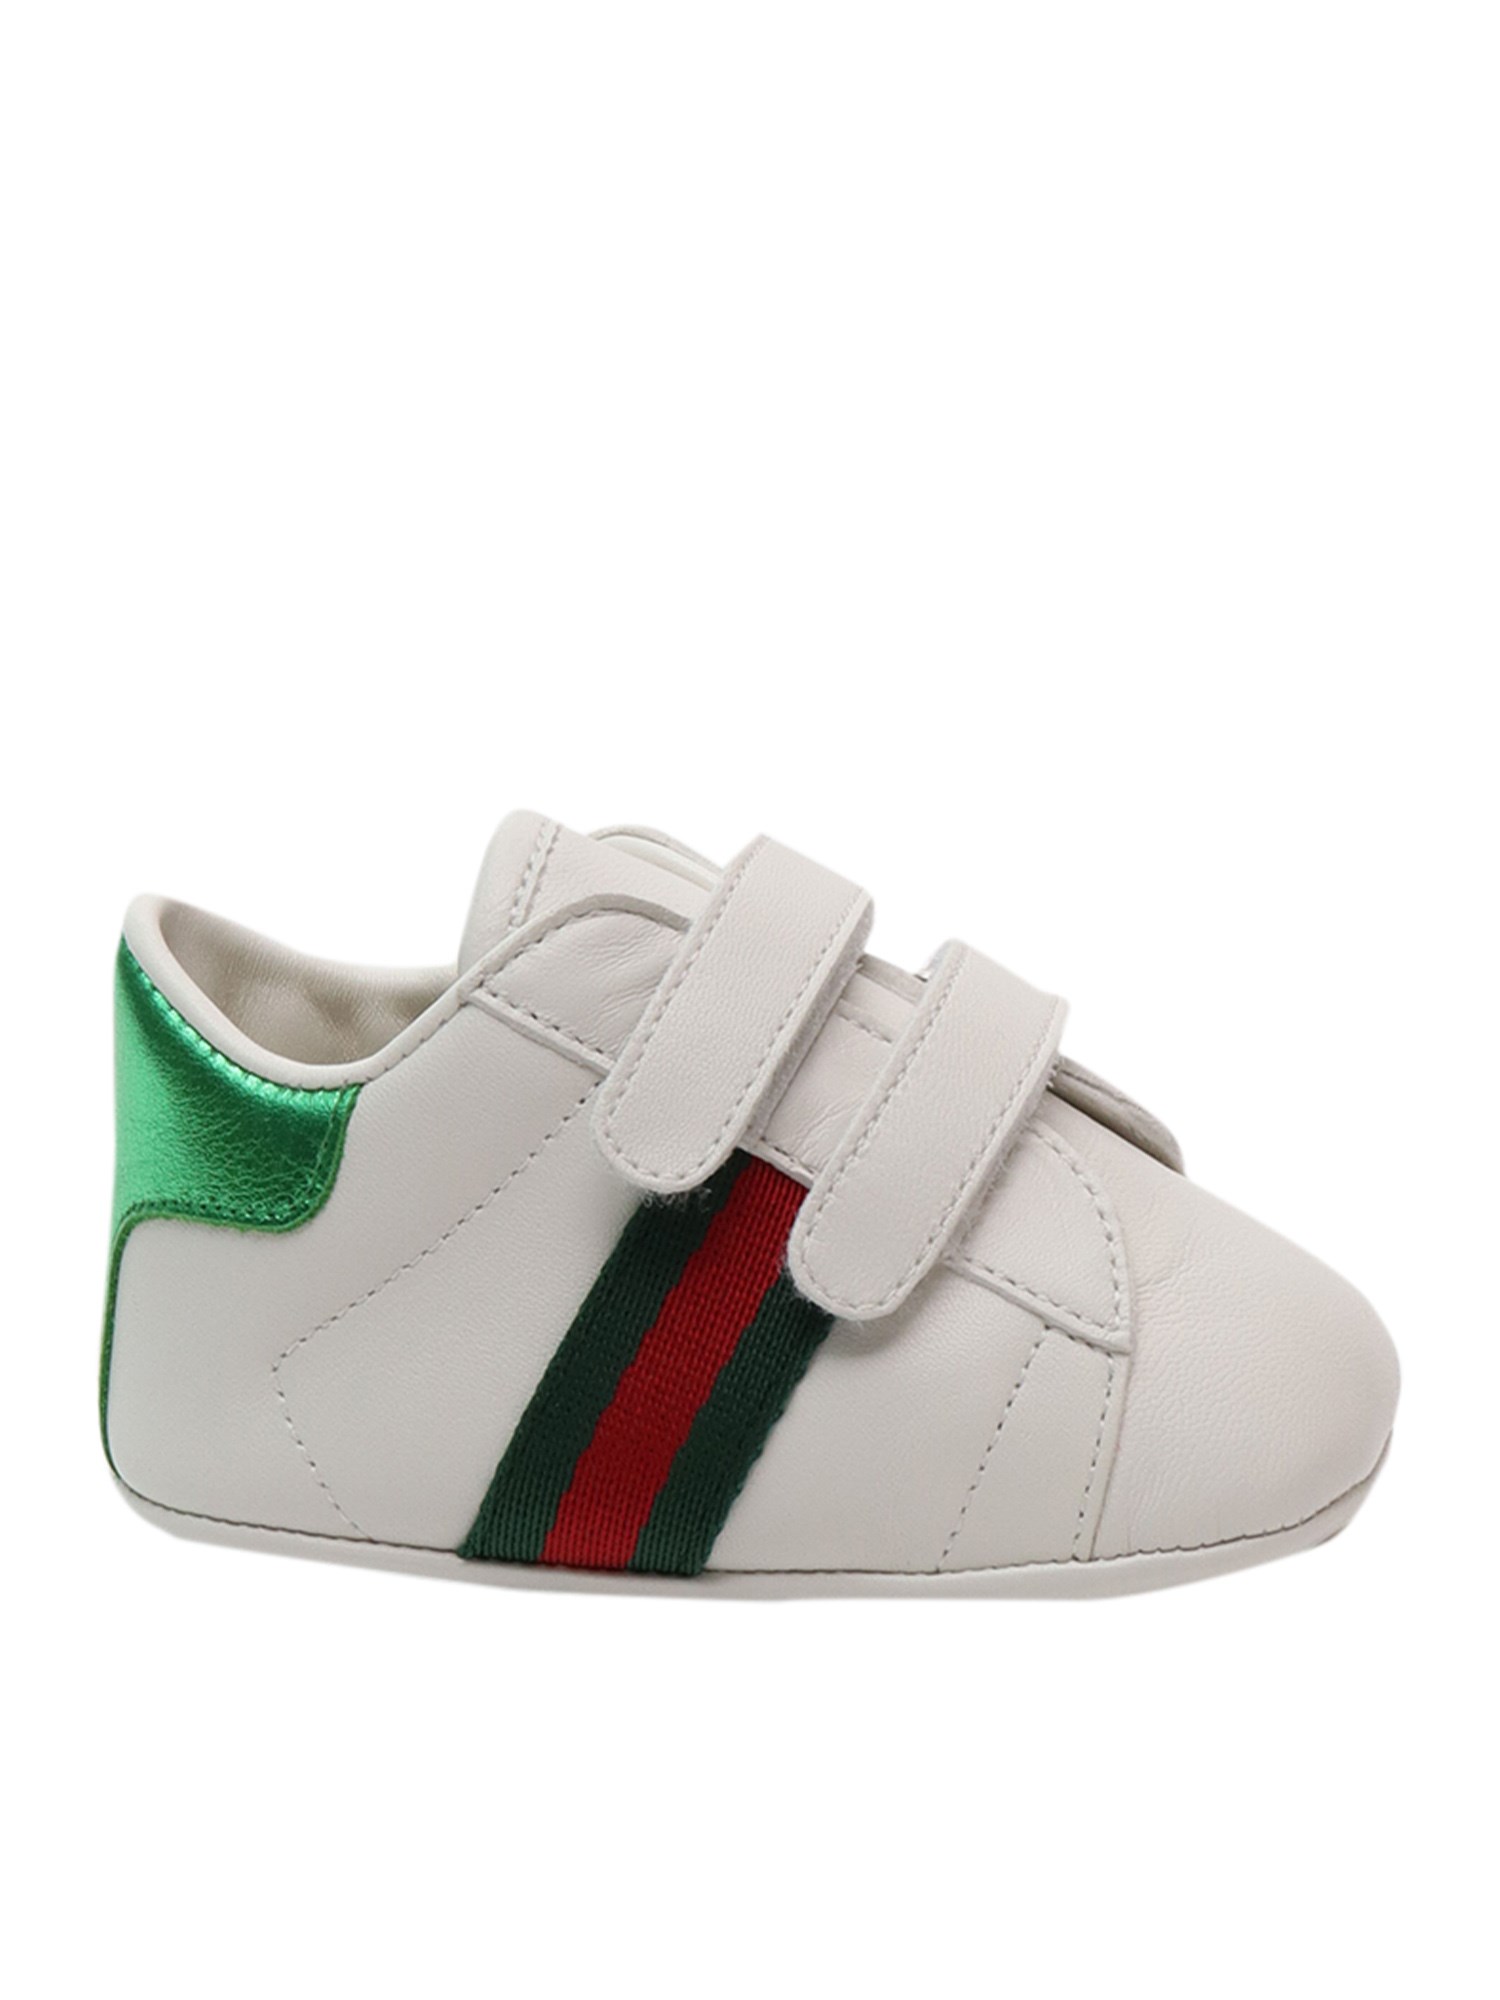 Gucci Baby New Ace Sneakers In Multi